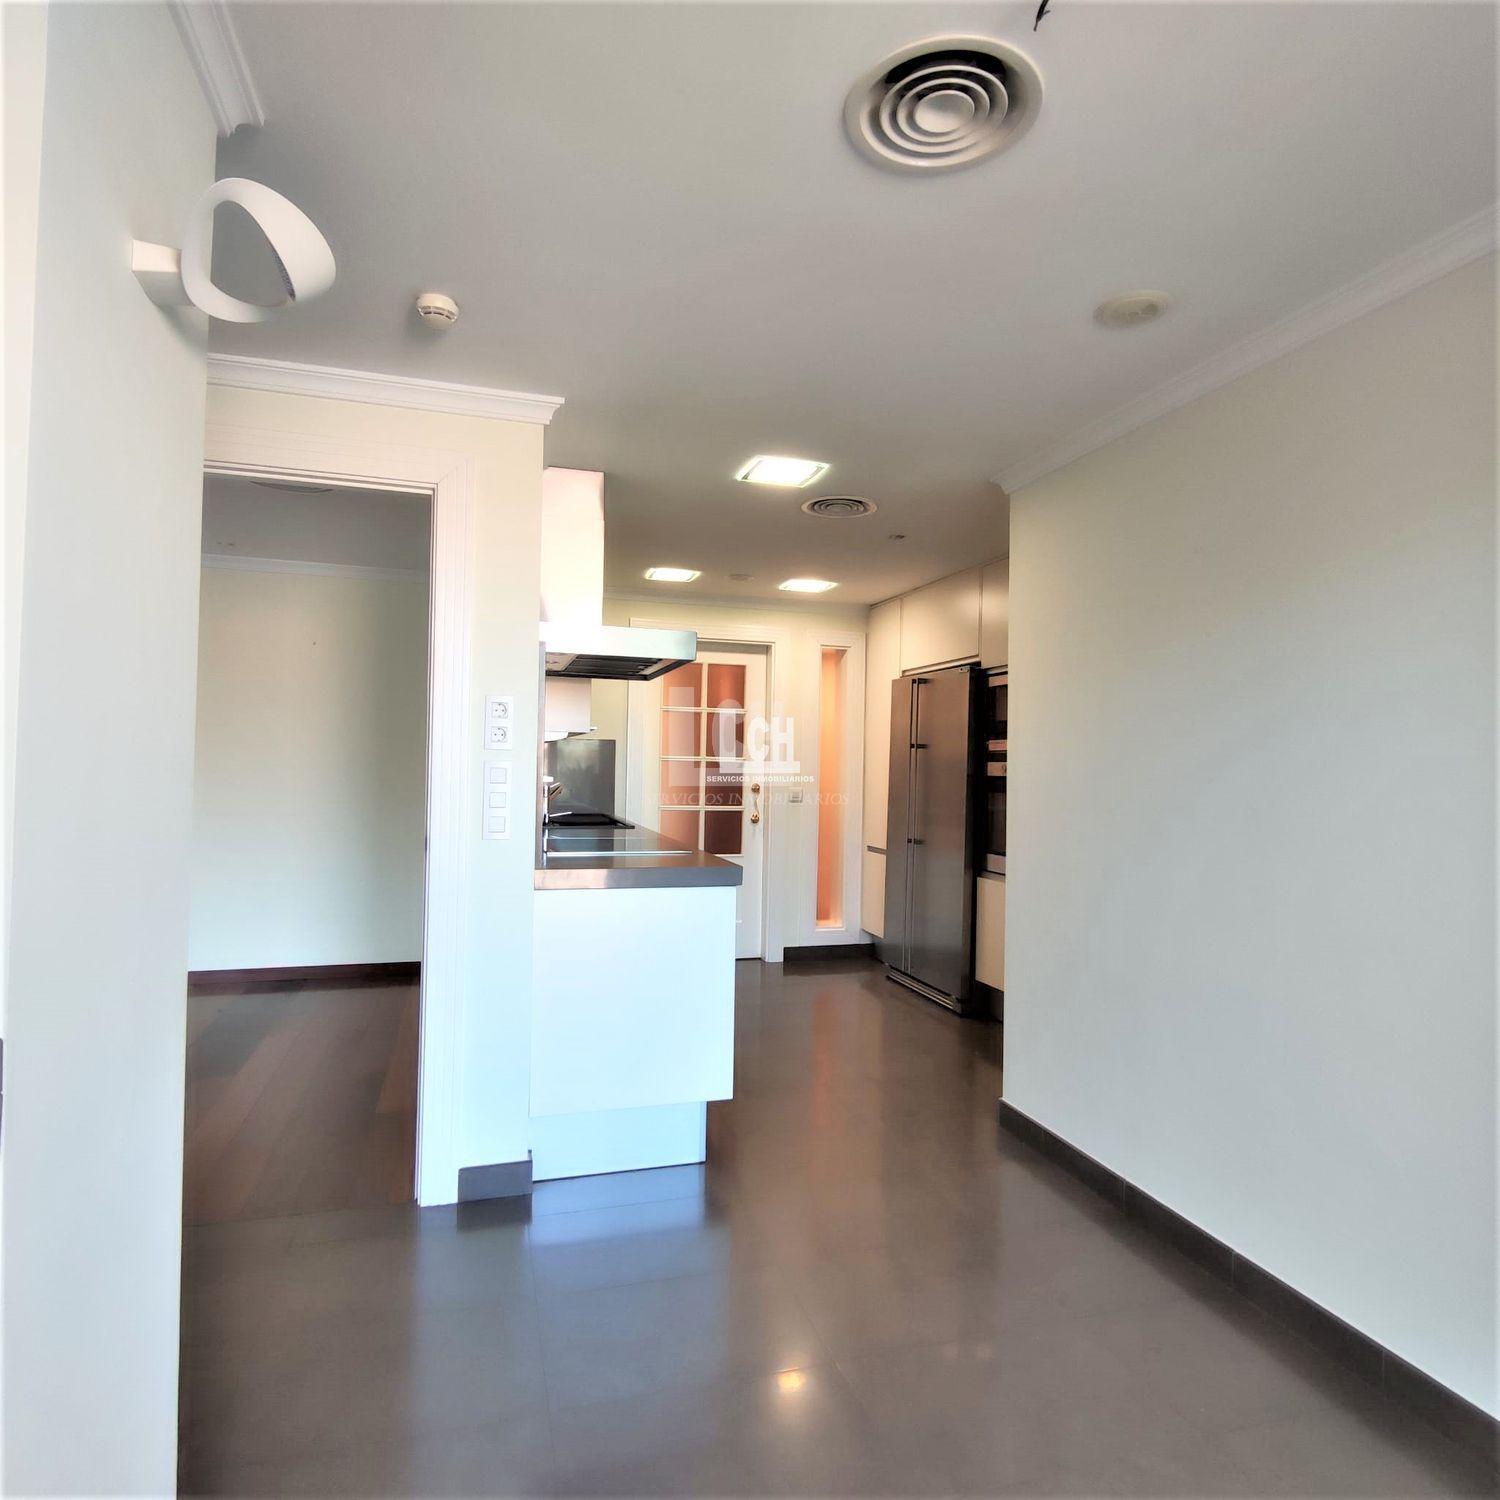 For rent of flat in València